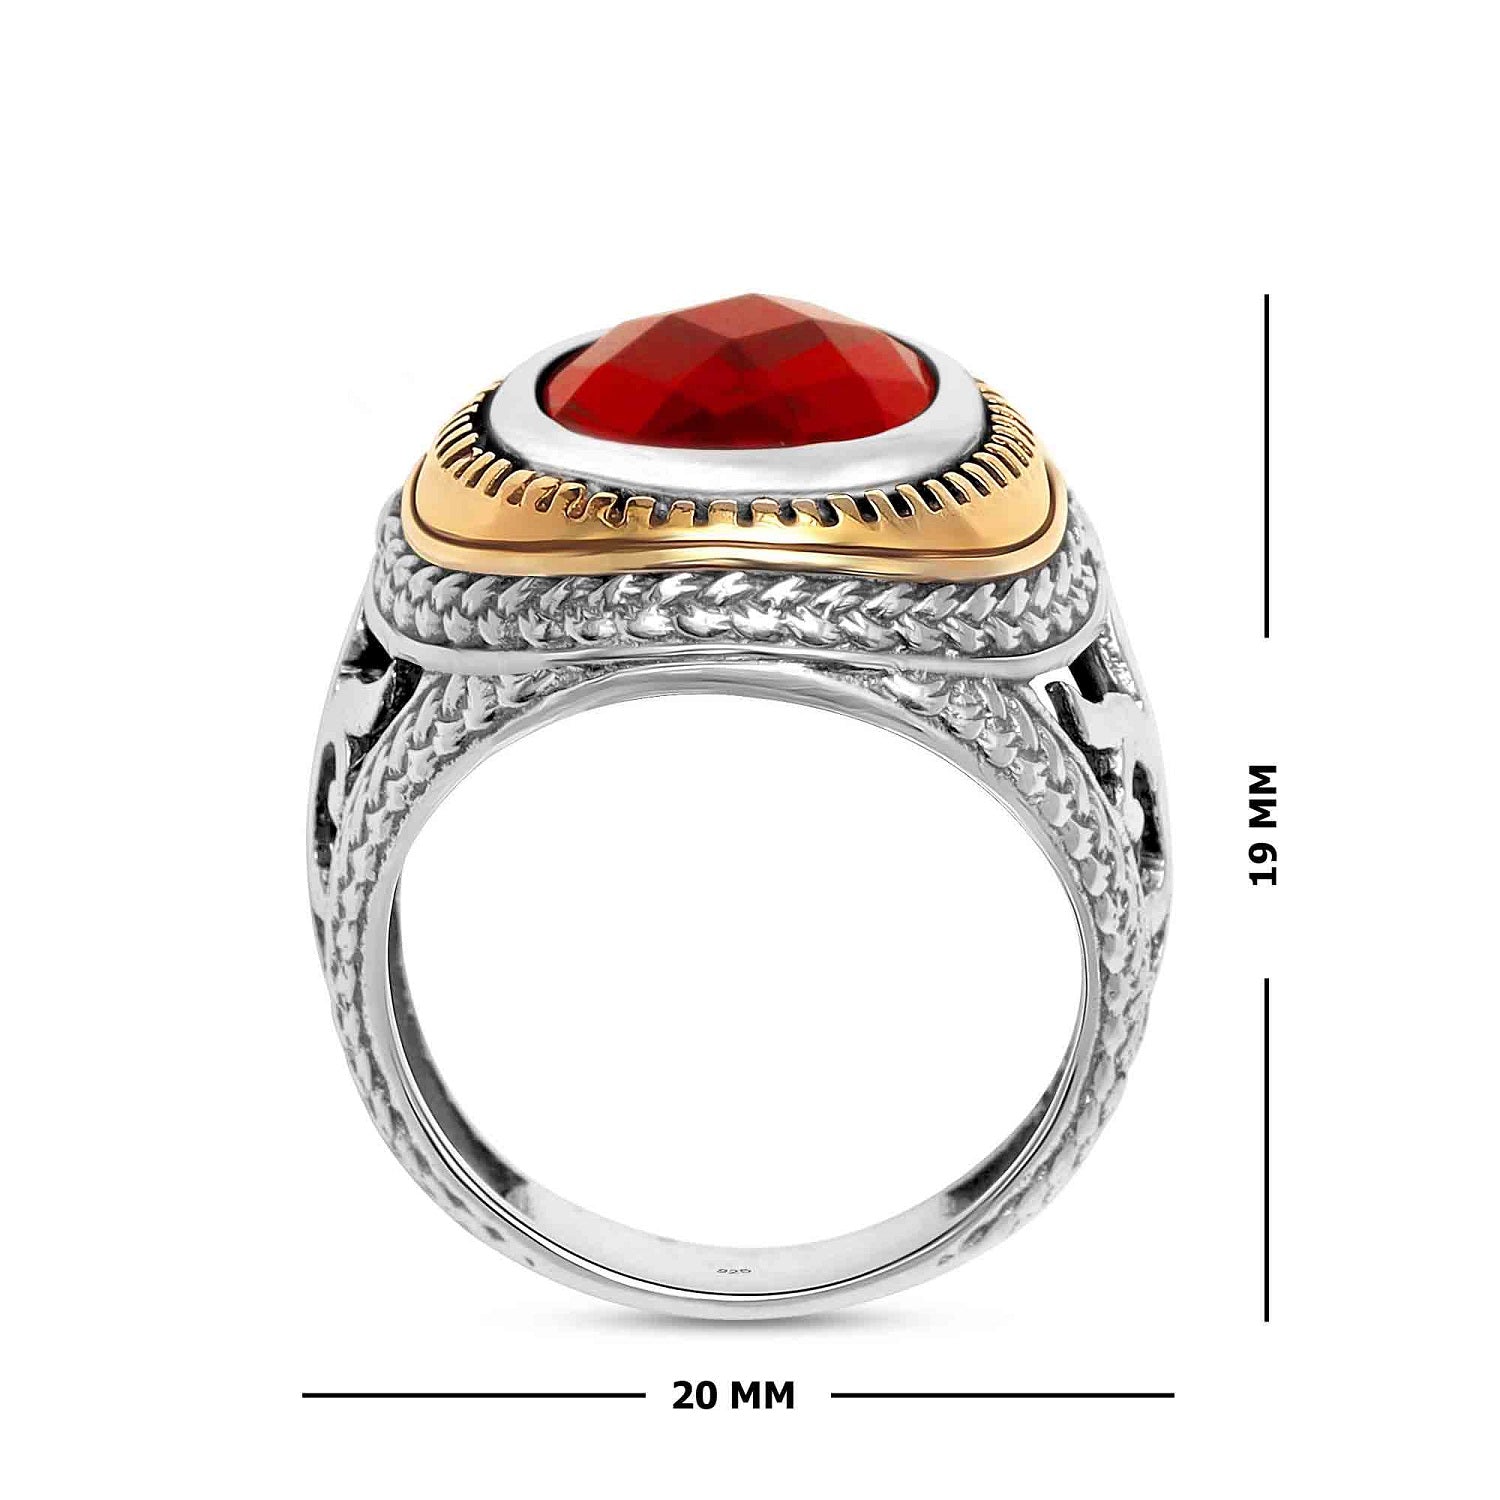 Amazon.com: Foxtail Chain Design 925 Sterling Silver Garnet Stone Men's Ring,  Handmade Silver Ring for Men, Red Garnet Stone Ring, Man Silver Garnet  Stone Ring : Handmade Products